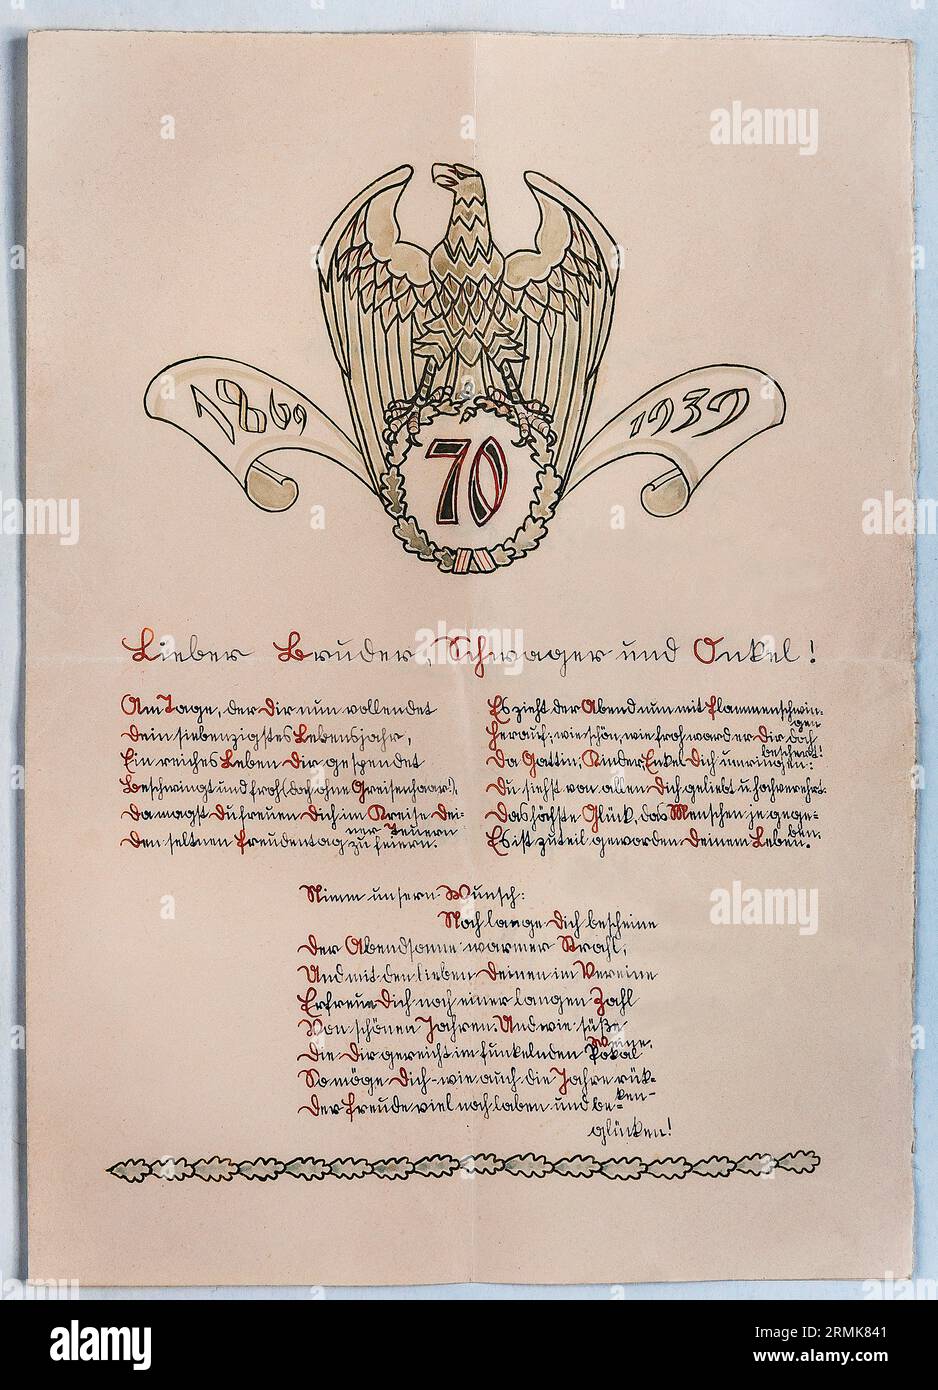 Bief with drawing from 1939 in Suetterlin script, congratulations on 70th birthday, Germany Stock Photo